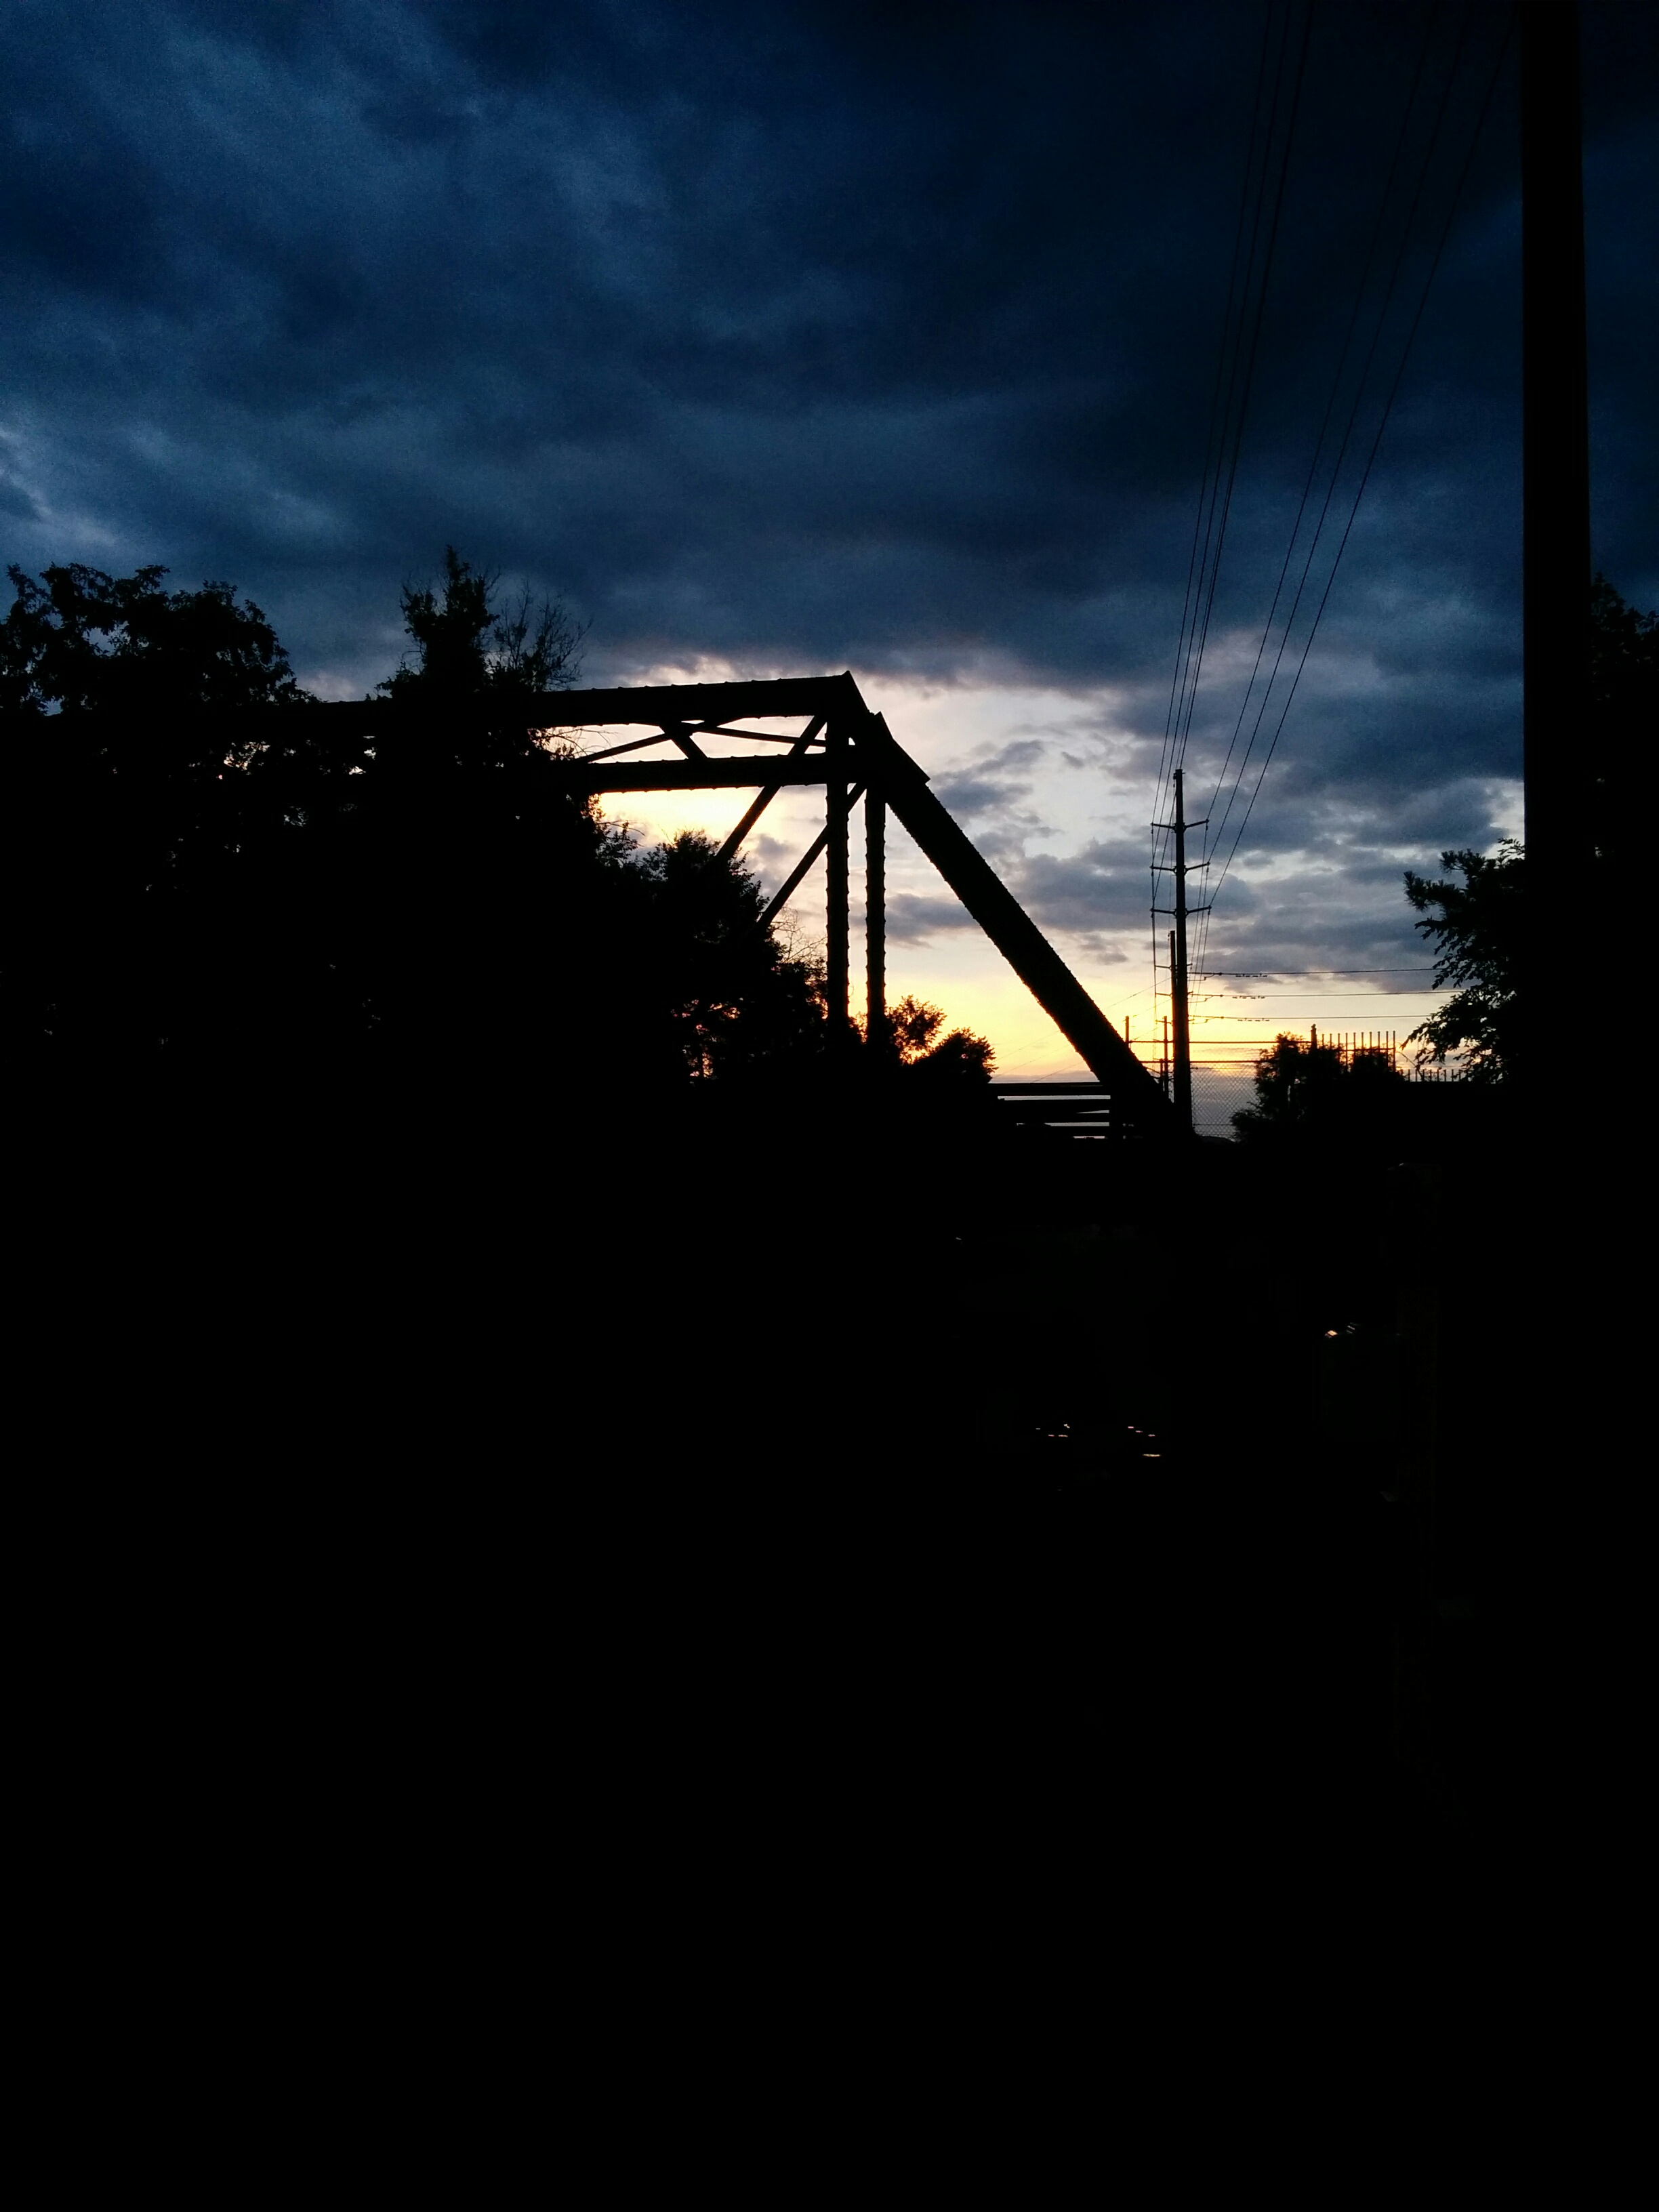 A nice abandoned railway bridge in front of the sunset.